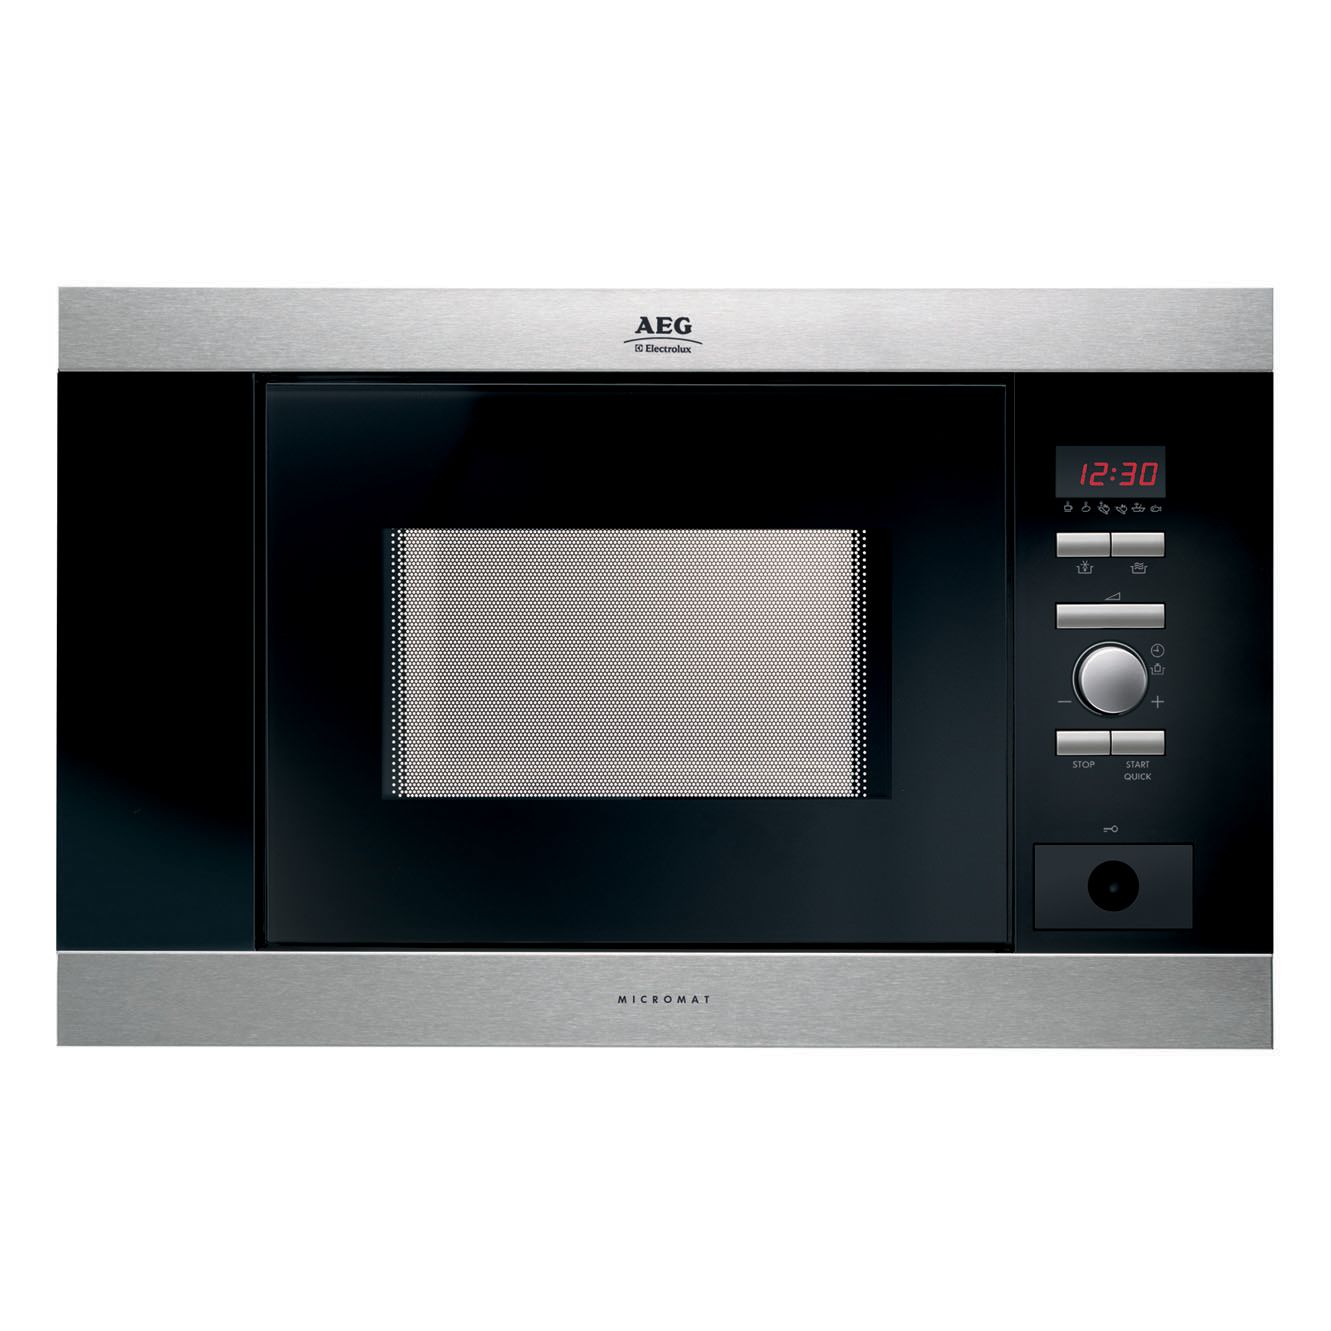 AEG MCD1762EM Built-in Microwave and Grill, Stainless Steel at John Lewis